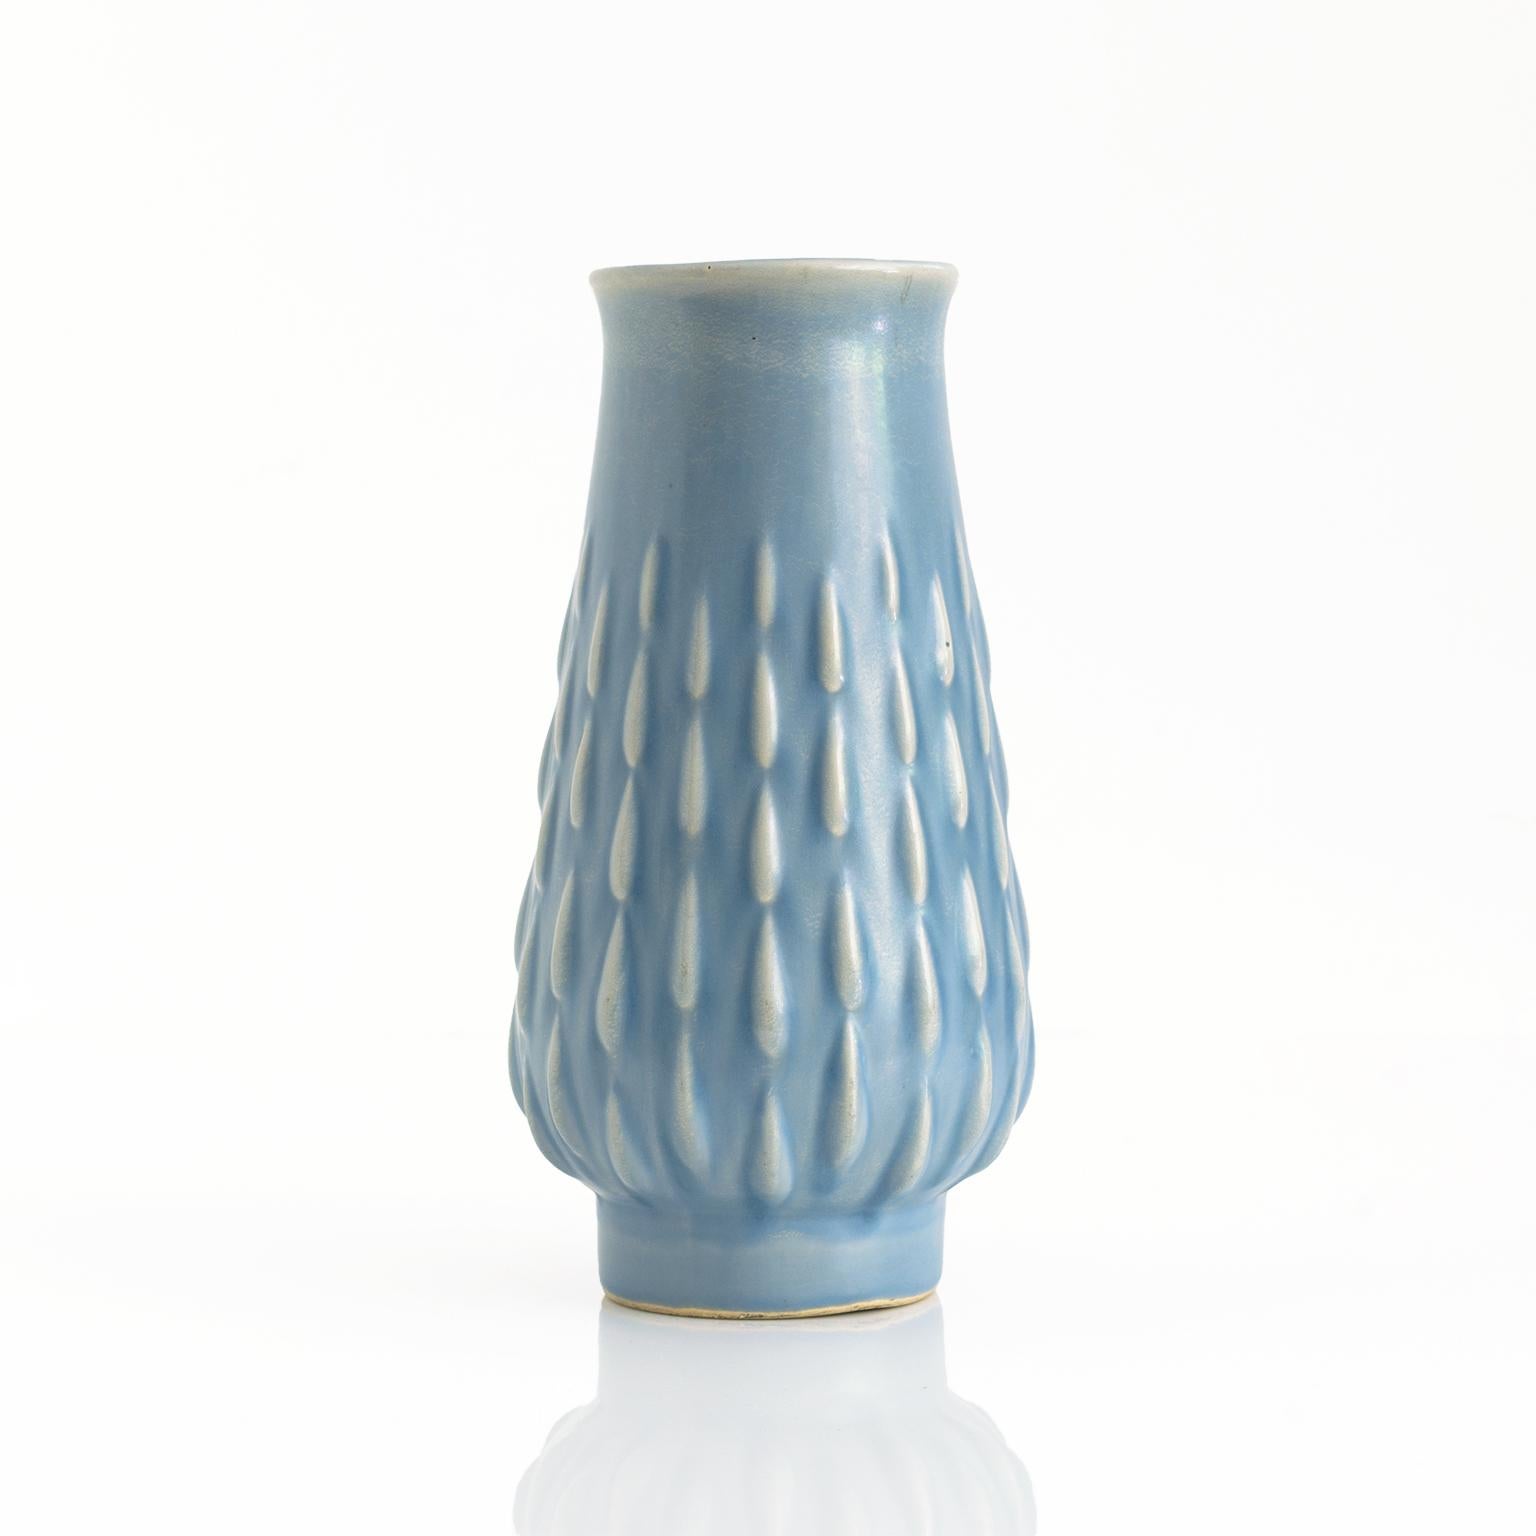 An Ewald Dahlskog footed glazed pale blue vase with raised pattern. Signed on bottom “ED” with makers mark for Bo Fajans. Made in Sweden circa late 1930’s. 

Measures: height: 8”, diameter: 4.25”.